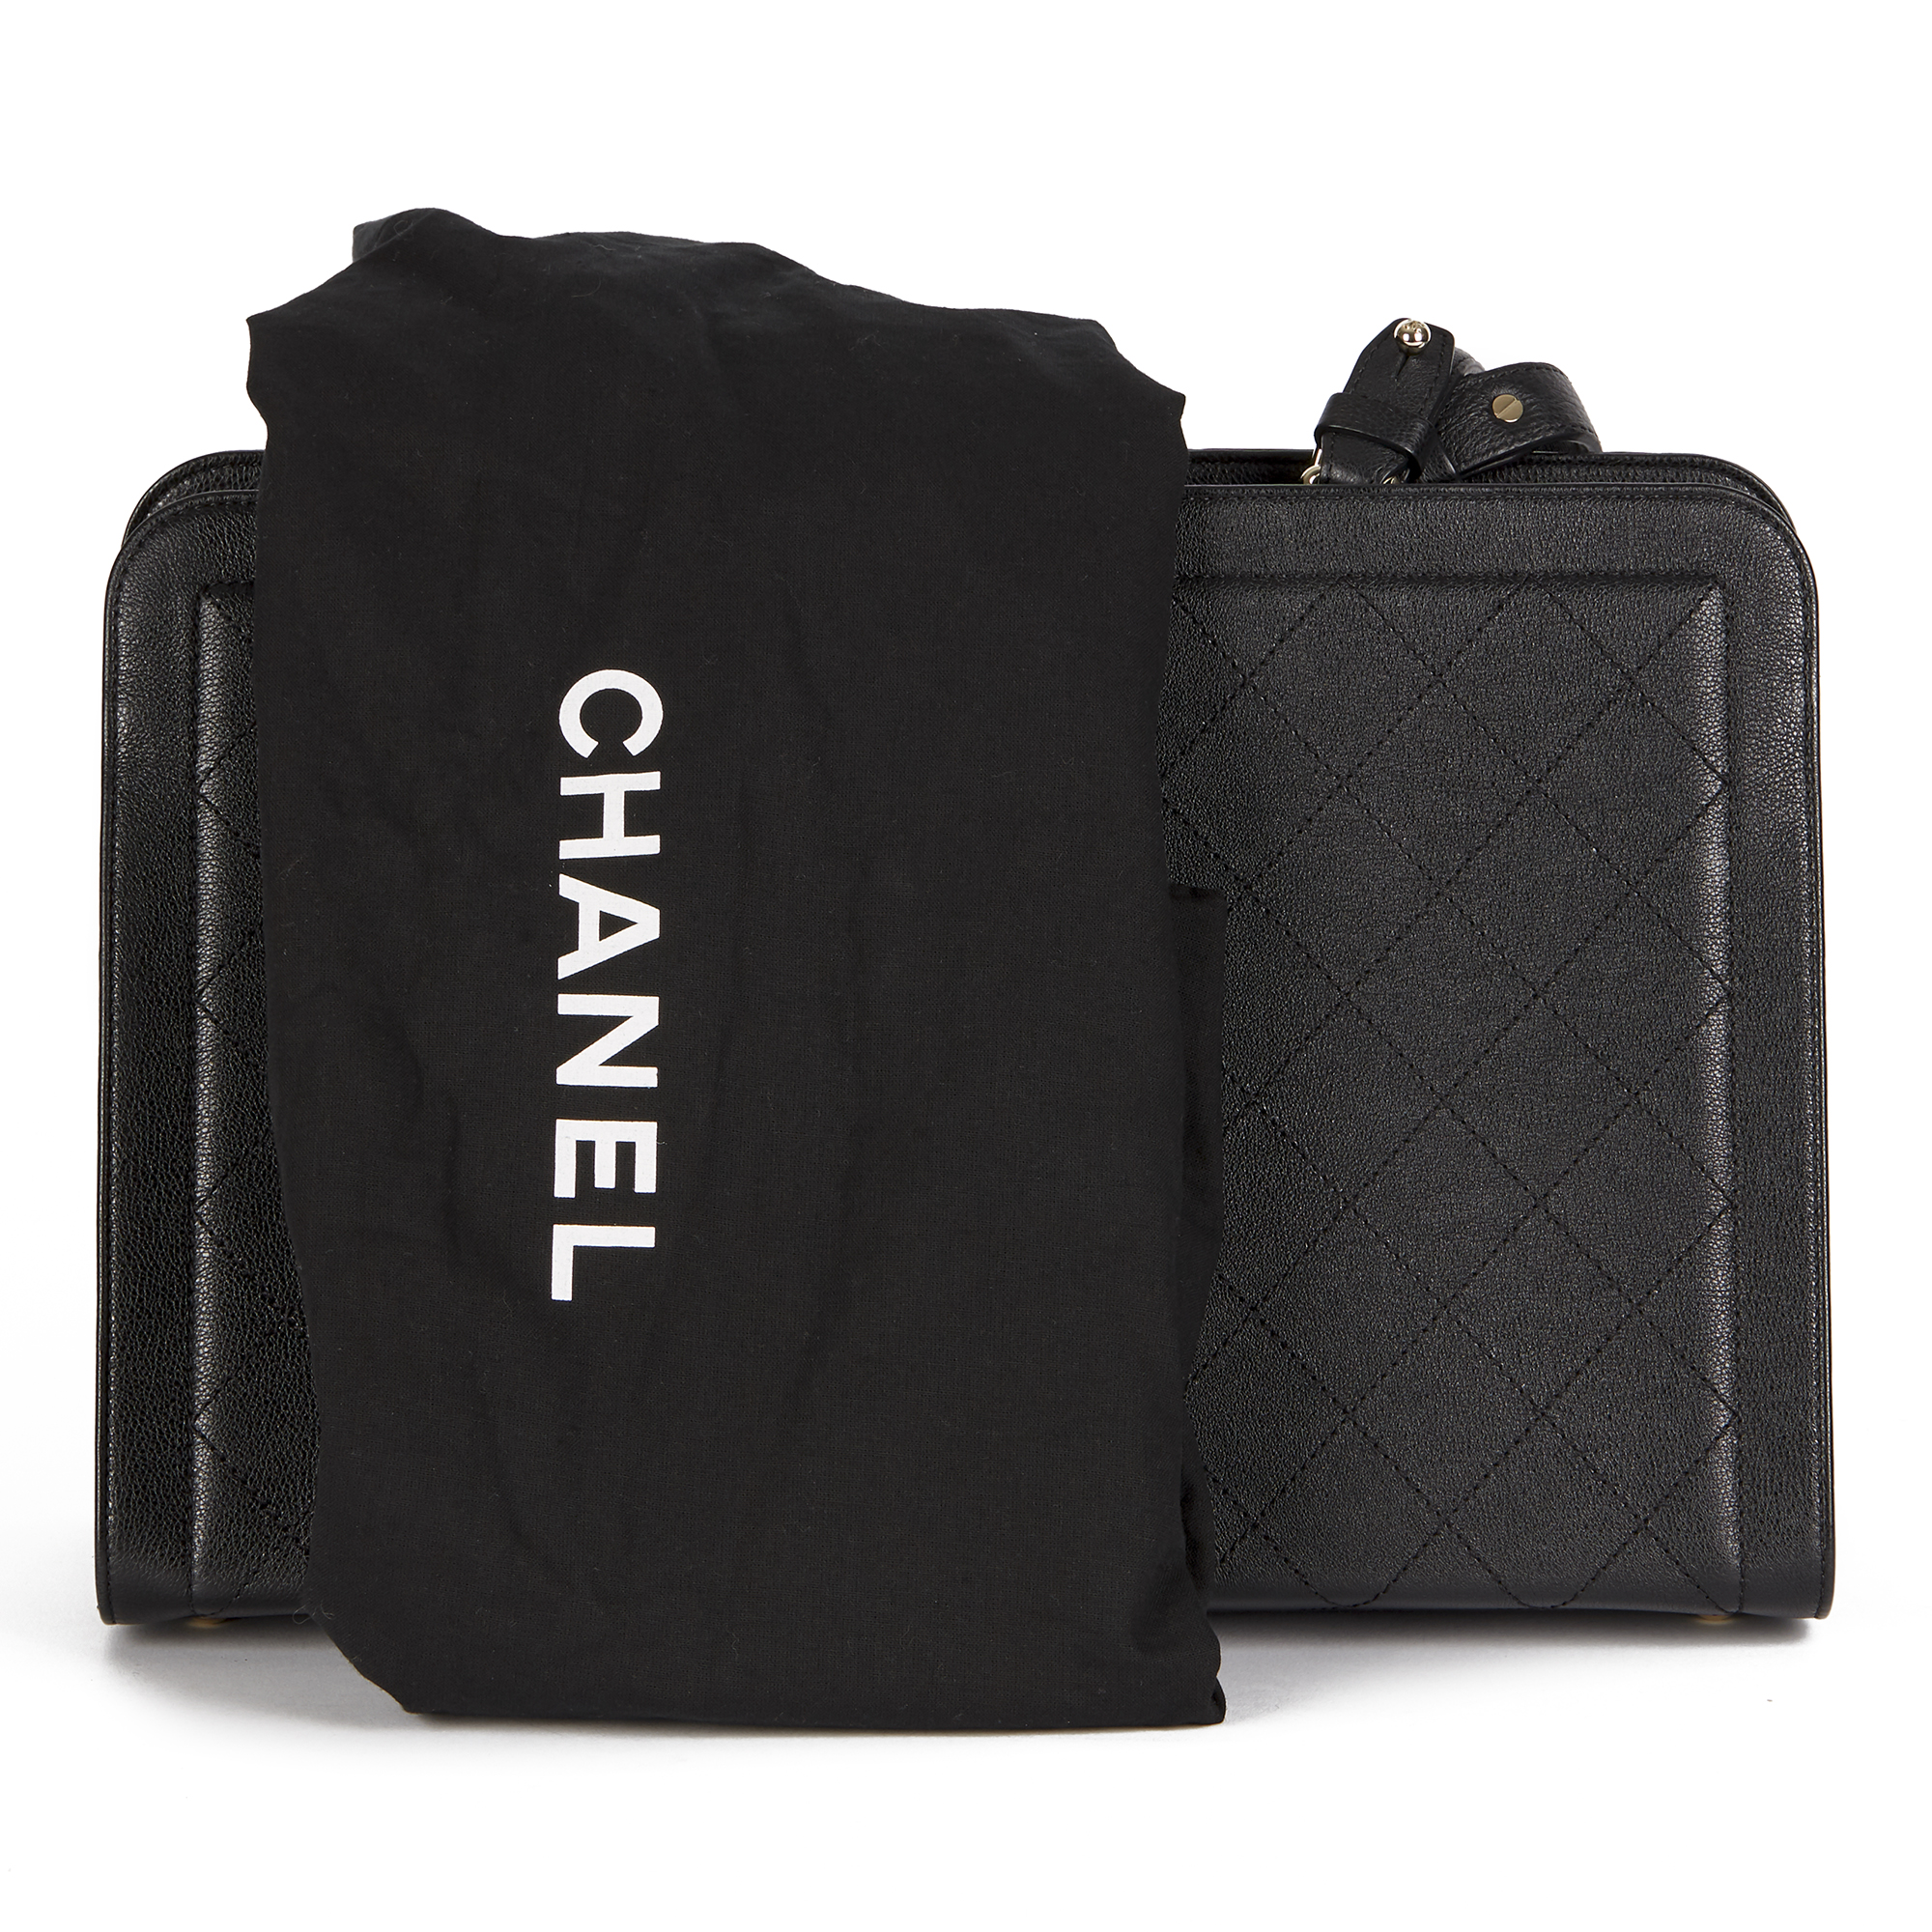 Chanel Black Quilted Calfskin Leather Large Label Click bidping Tote - Image 3 of 12